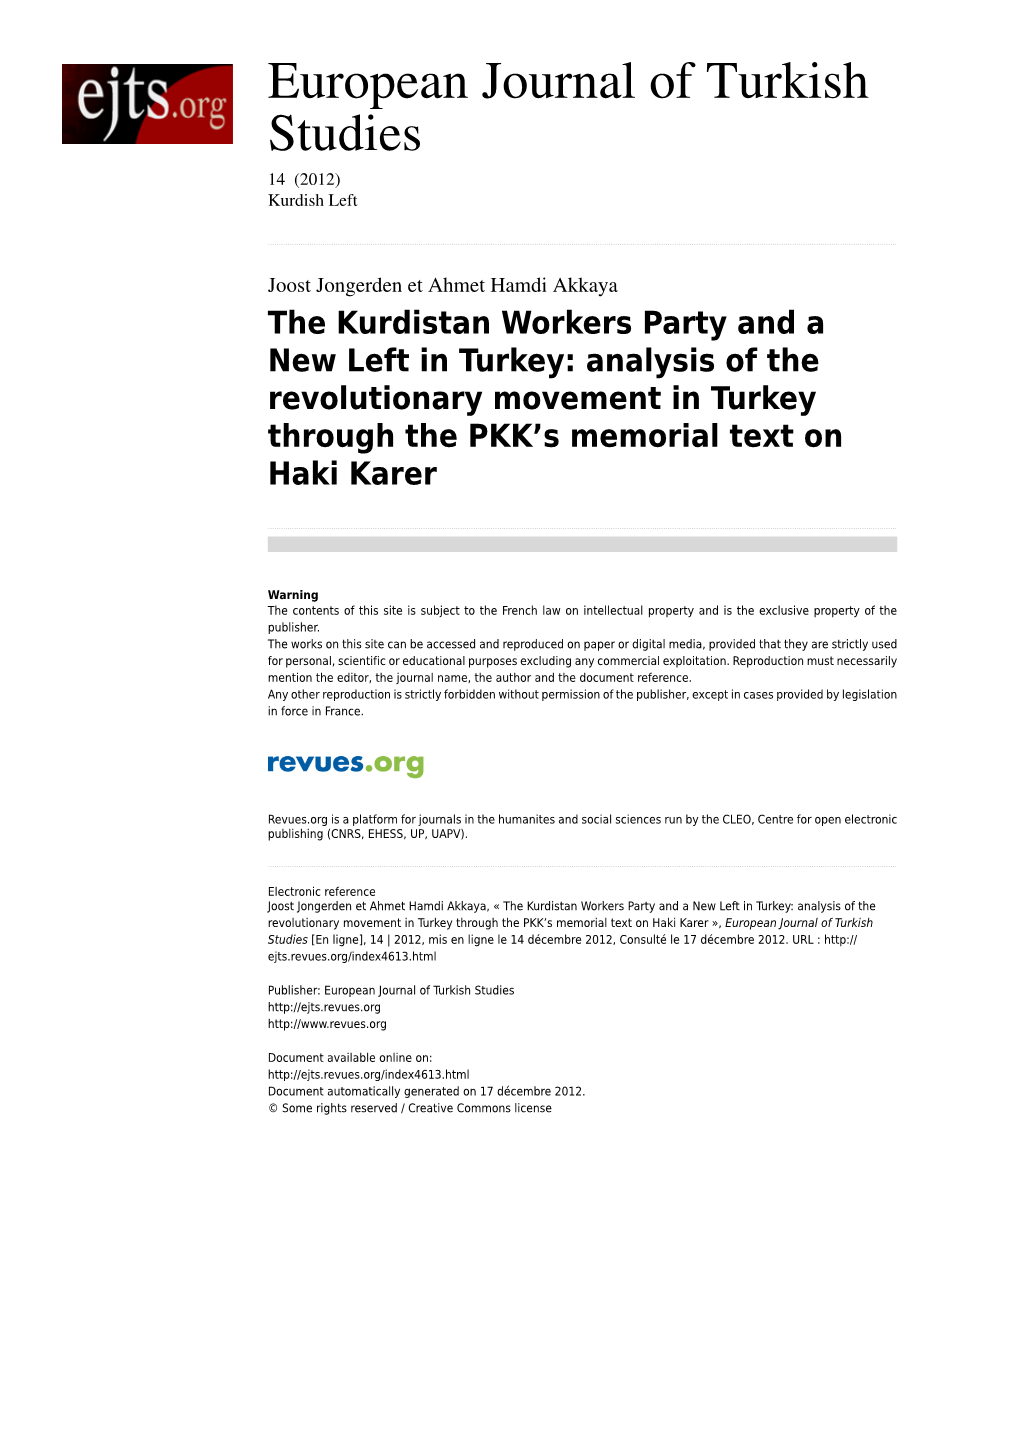 The Kurdistan Workers Party and a New Left in Turkey: Analysis of the Revolutionary Movement in Turkey Through the PKK’S Memorial Text on Haki Karer